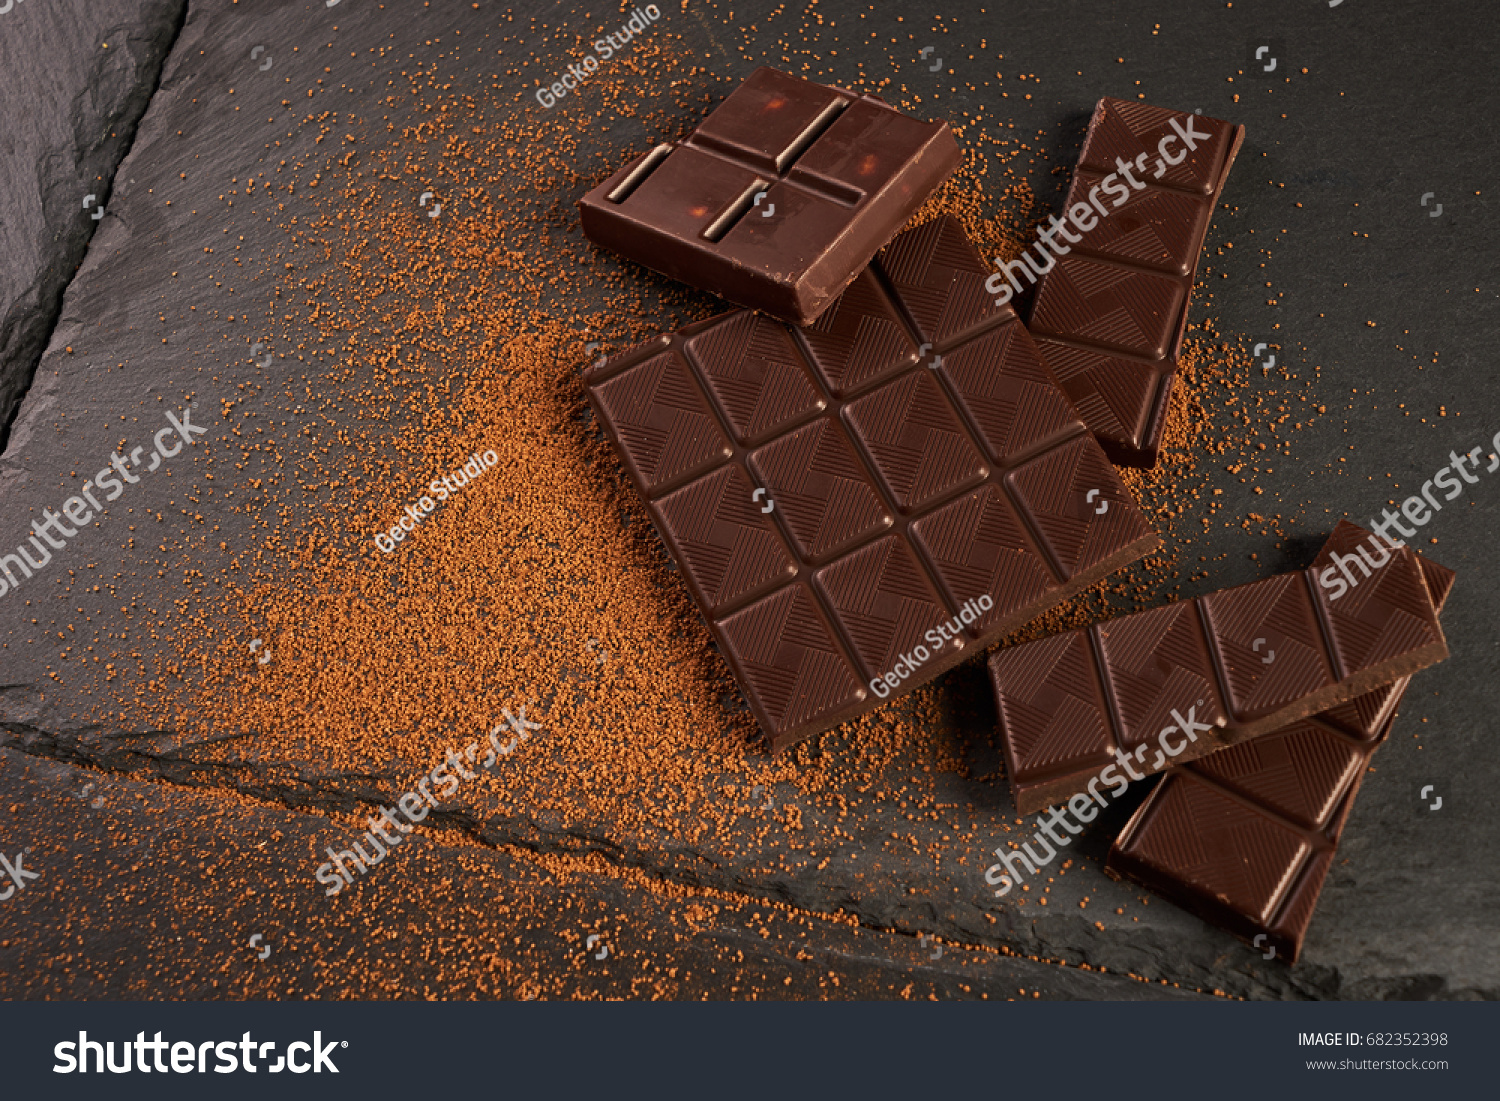 Close-up of broken chocolate pieces and cocoa powder on dark stone background with copy space. #682352398